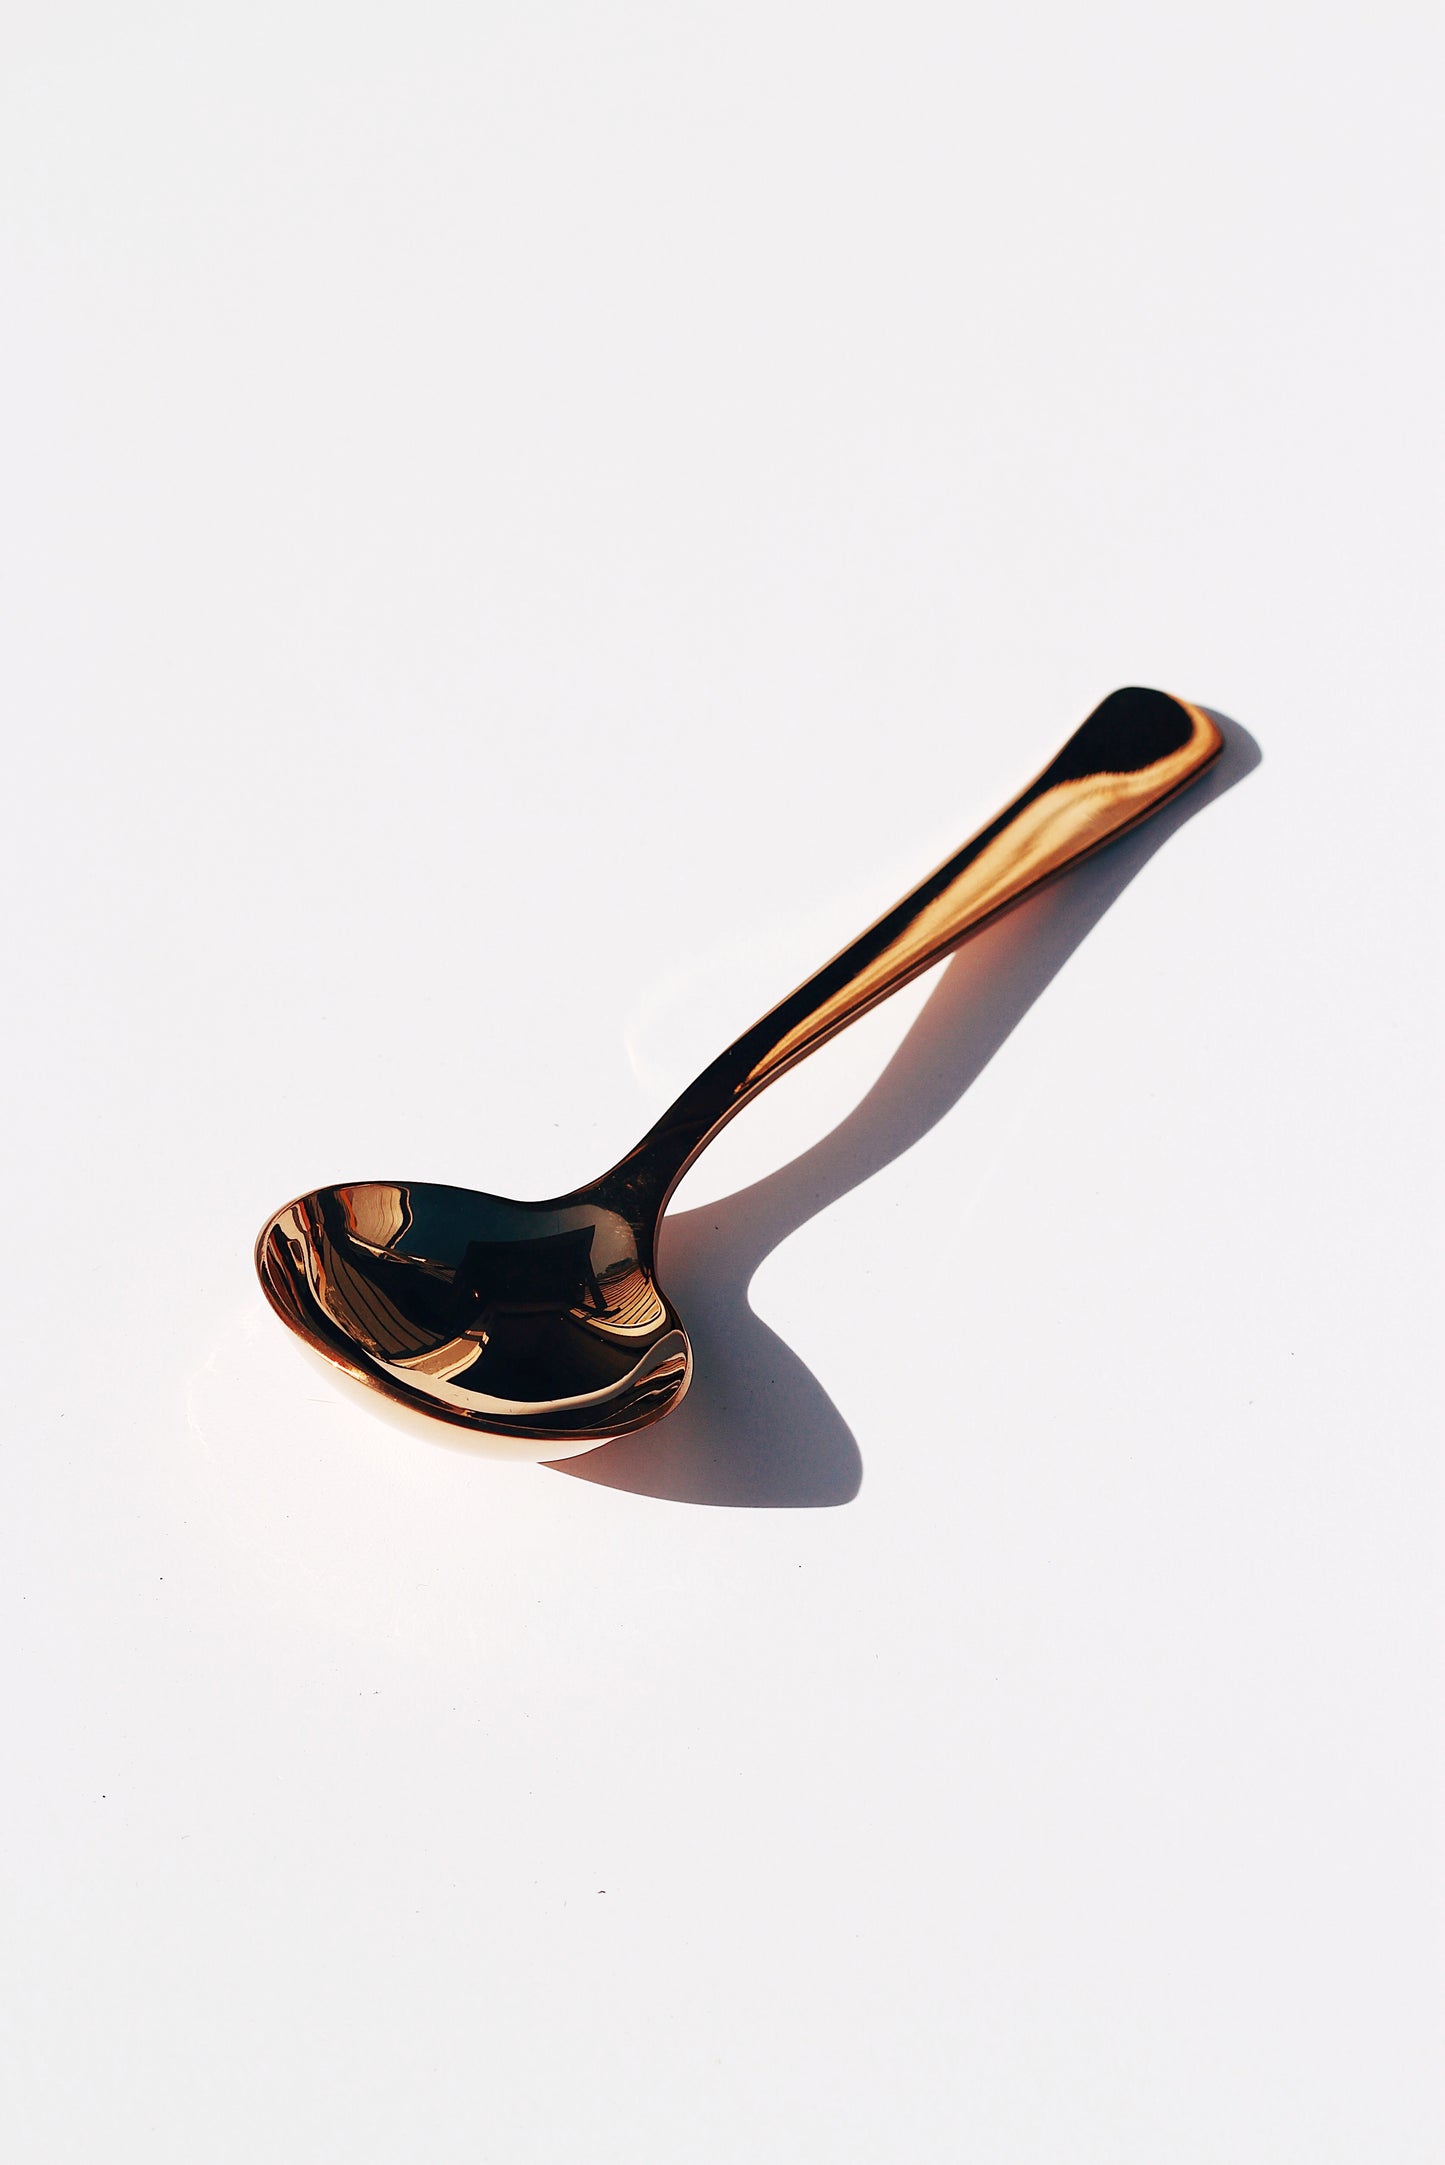 The Big Dipper Cupping Spoon by Umeshiso - Rosé